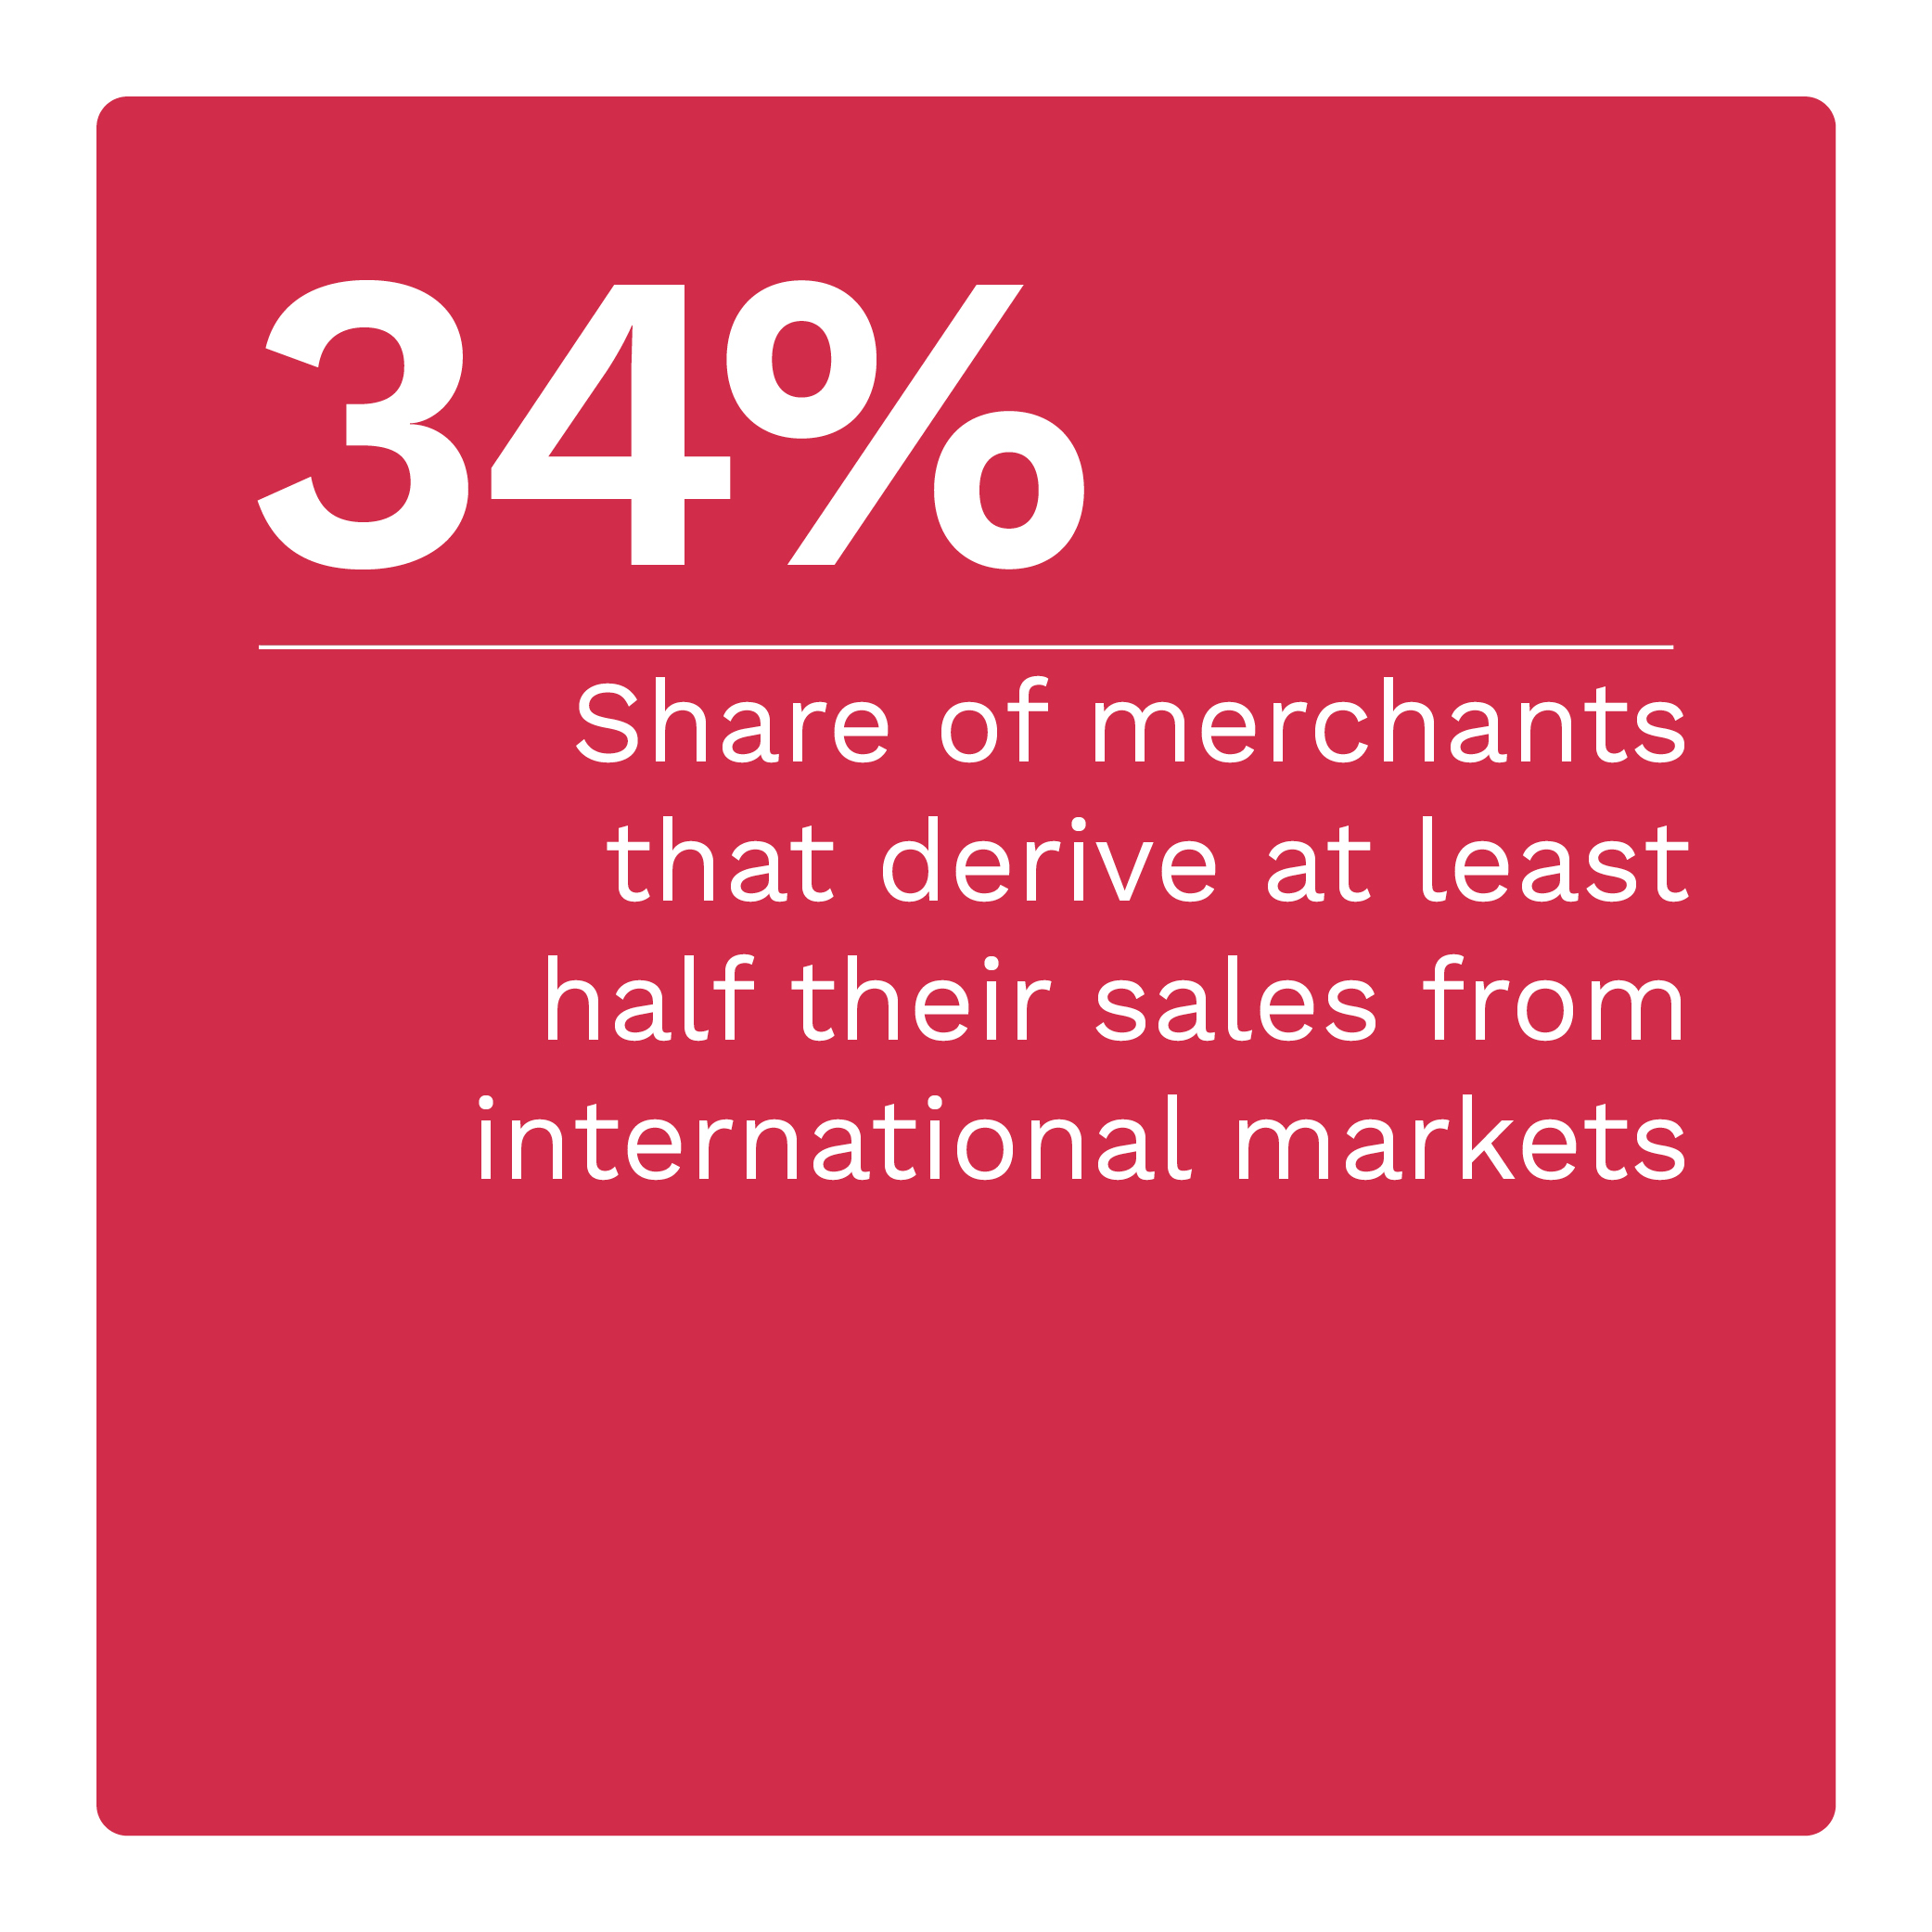 34%: Share of merchants that derive at least half their sales from international markets